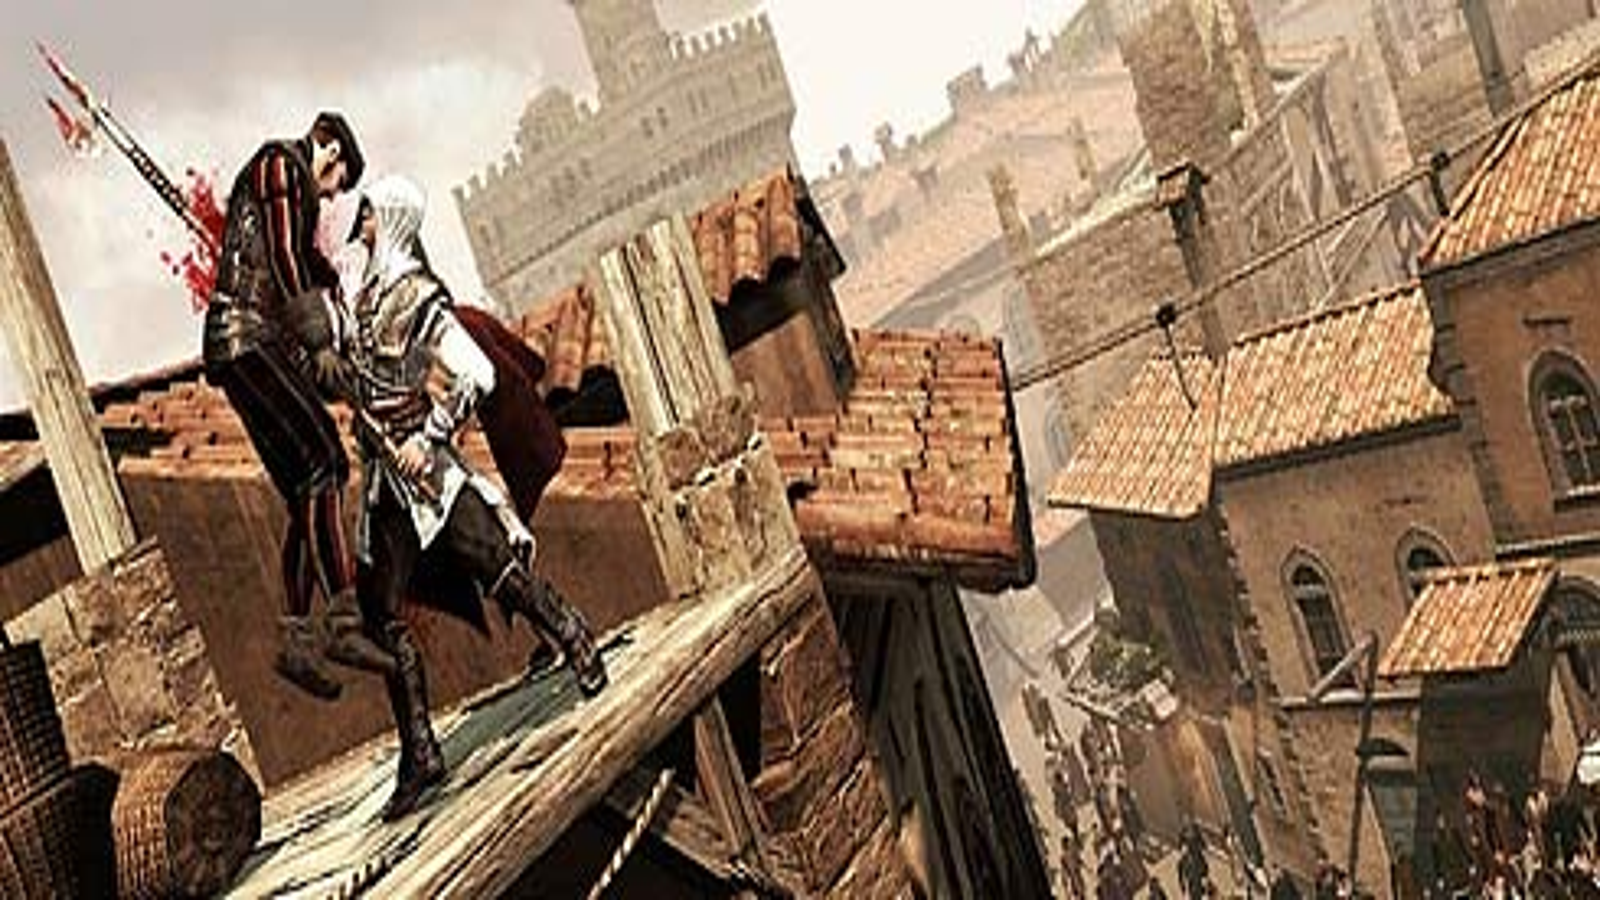 Assassin's Creed 2, Games